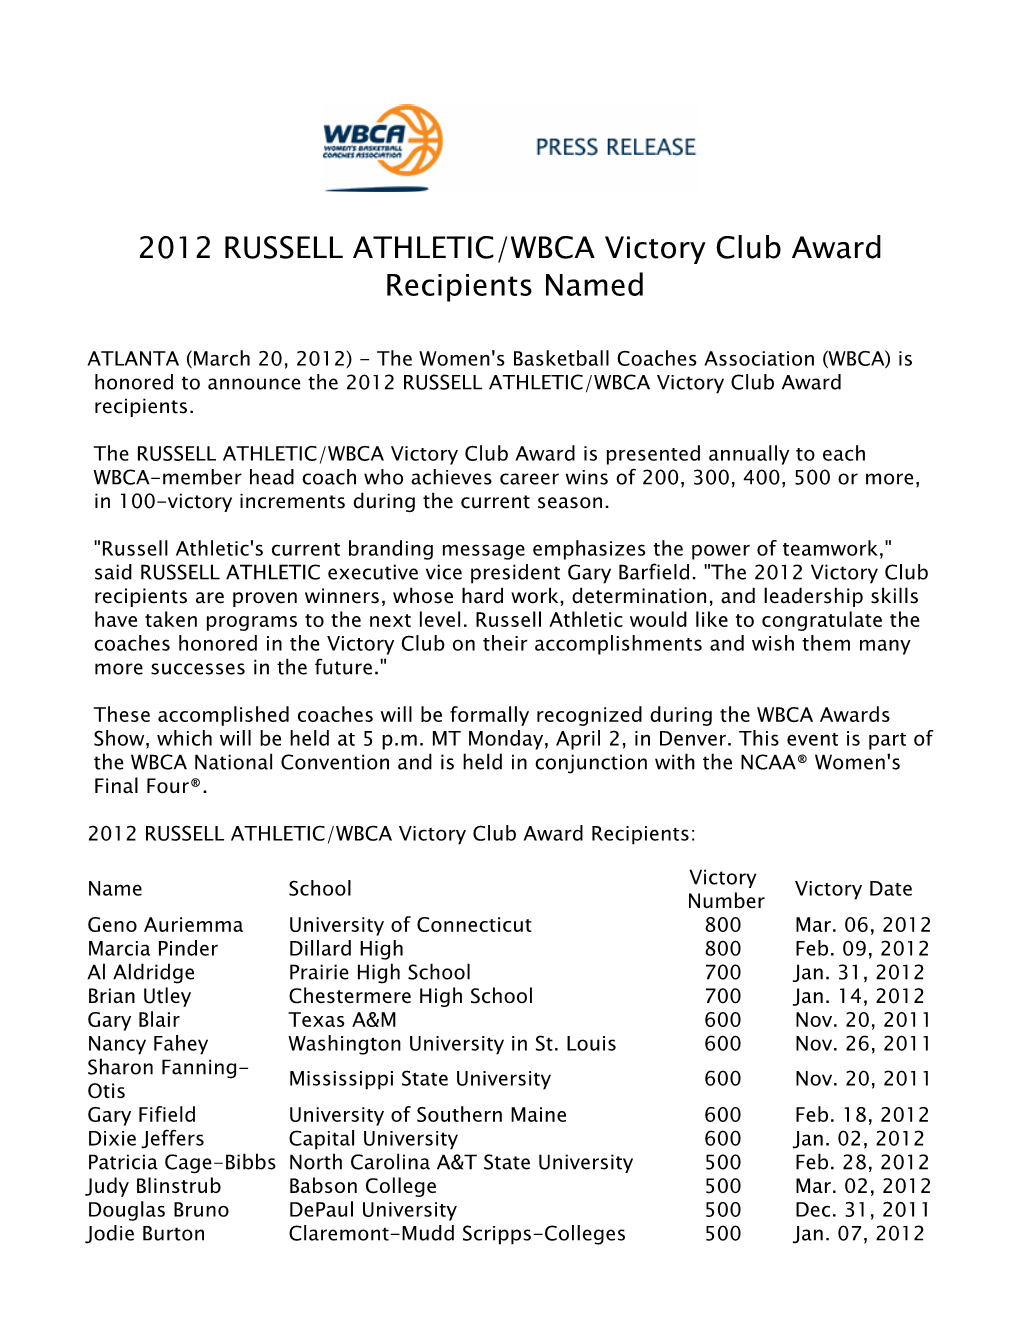 2012 RUSSELL ATHLETIC/WBCA Victory Club Award Recipients Named